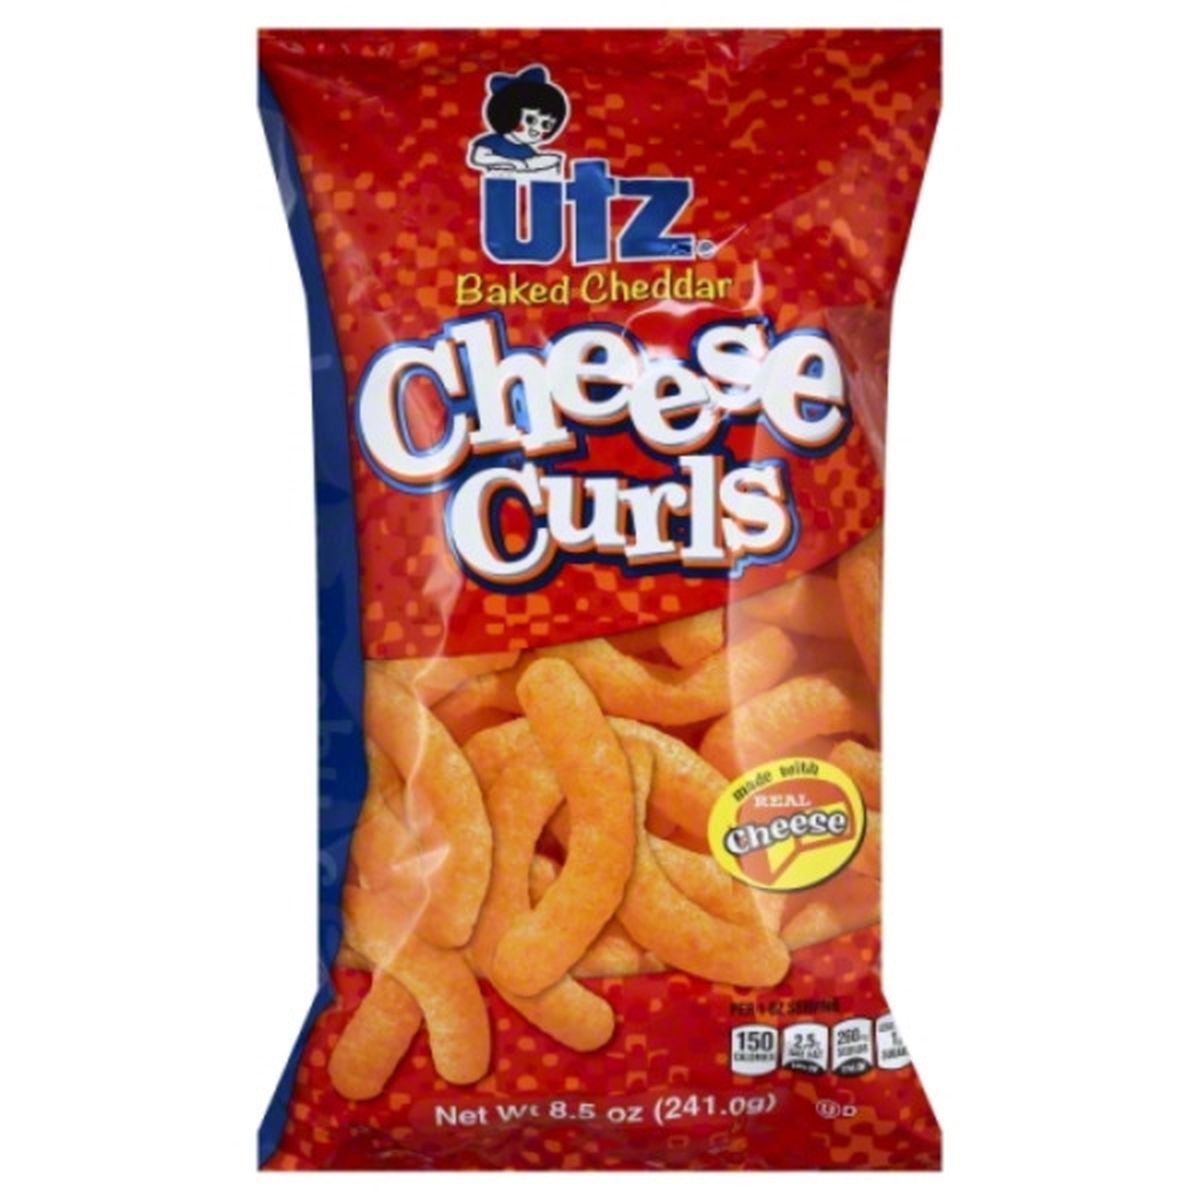 Calories in Utz Cheese Curls, Baked Cheddar